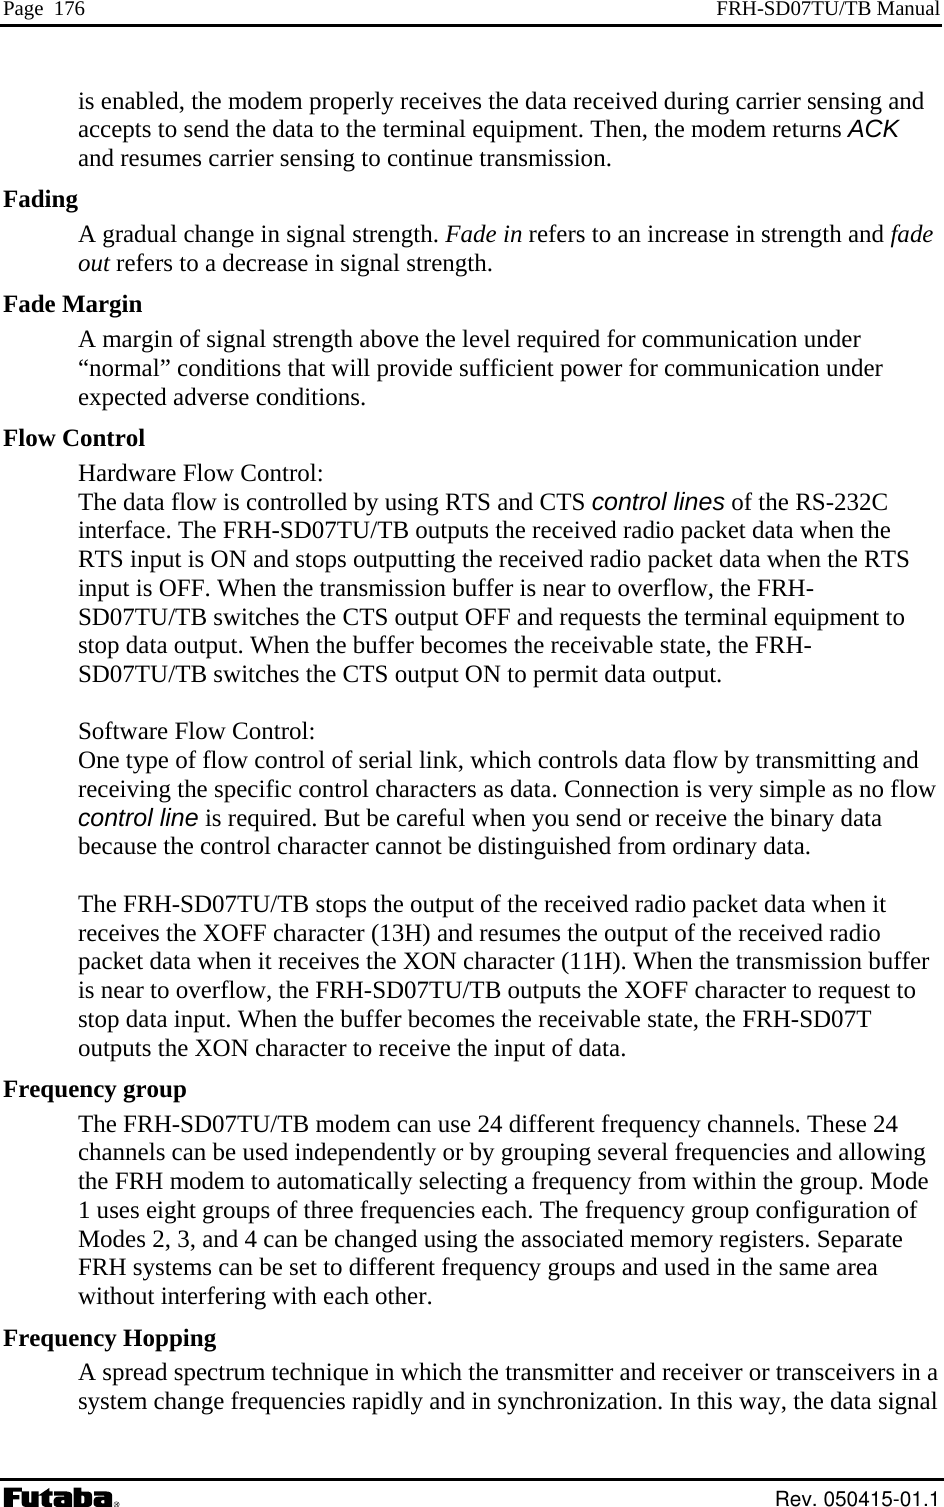 Page  176  FRH-SD07TU/TB Manual is enabled, the modem properly receives the data received during carrier sensing and accepts to send the data to the terminal equipment. Then, the modem returns ACK and resumes carrier sensing to continue transmission.  A gradual change in signal strength. Fade in refers to an increase in strength and fadeout refers to a decrease in signal strength. Fading Mhe CTS output ON to permit data output.   l when you send or receive the binary data racter cannot be distinguished from ordinary data.  io receives the XON character (11H). When the transmission buffer , the FRH-SD07TU/TB outputs the XOFF character to request to Frequency group TB modem can use 24 different frequency channels. These 24 f Frequeectrum technique in which the transmitter and receiver or transceivers in a system change frequencies rapidly and in synchronization. In this way, the data signal Fade  argin A margin of signal strength above the level required for communication under “normal” conditions that will provide sufficient power for communication under expected adverse conditions. Flow Control Hardware Flow Control:   The data flow is controlled by using RTS and CTS control lines of the RS-232C interface. The FRH-SD07TU/TB outputs the received radio packet data when the RTS input is ON and stops outputting the received radio packet data when the RTS input is OFF. When the transmission buffer is near to overflow, the FRH-SD07TU/TB switches the CTS output OFF and requests the terminal equipment to stop data output. When the buffer becomes the receivable state, the FRH-SD07TU/TB switches t Software Flow Control:   One type of flow control of serial link, which controls data flow by transmitting andreceiving the specific control characters as data. Connection is very simple as no flowcontrol line is required. But be carefubecause the control cha The FRH-SD07TU/TB stops the output of the received radio packet data when it receives the XOFF character (13H) and resumes the output of the received radpacket data when it is near to overflowstop data input. When the buffer becomes the receivable state, the FRH-SD07T outputs the XON character to receive the input of data. The FRH-SD07TU/channels can be used independently or by grouping several frequencies and allowing the FRH modem to automatically selecting a frequency from within the group. Mode 1 uses eight groups of three frequencies each. The frequency group configuration oModes 2, 3, and 4 can be changed using the associated memory registers. Separate FRH systems can be set to different frequency groups and used in the same area without interfering with each other. ncy Hopping A spread sp Rev. 050415-01.1 